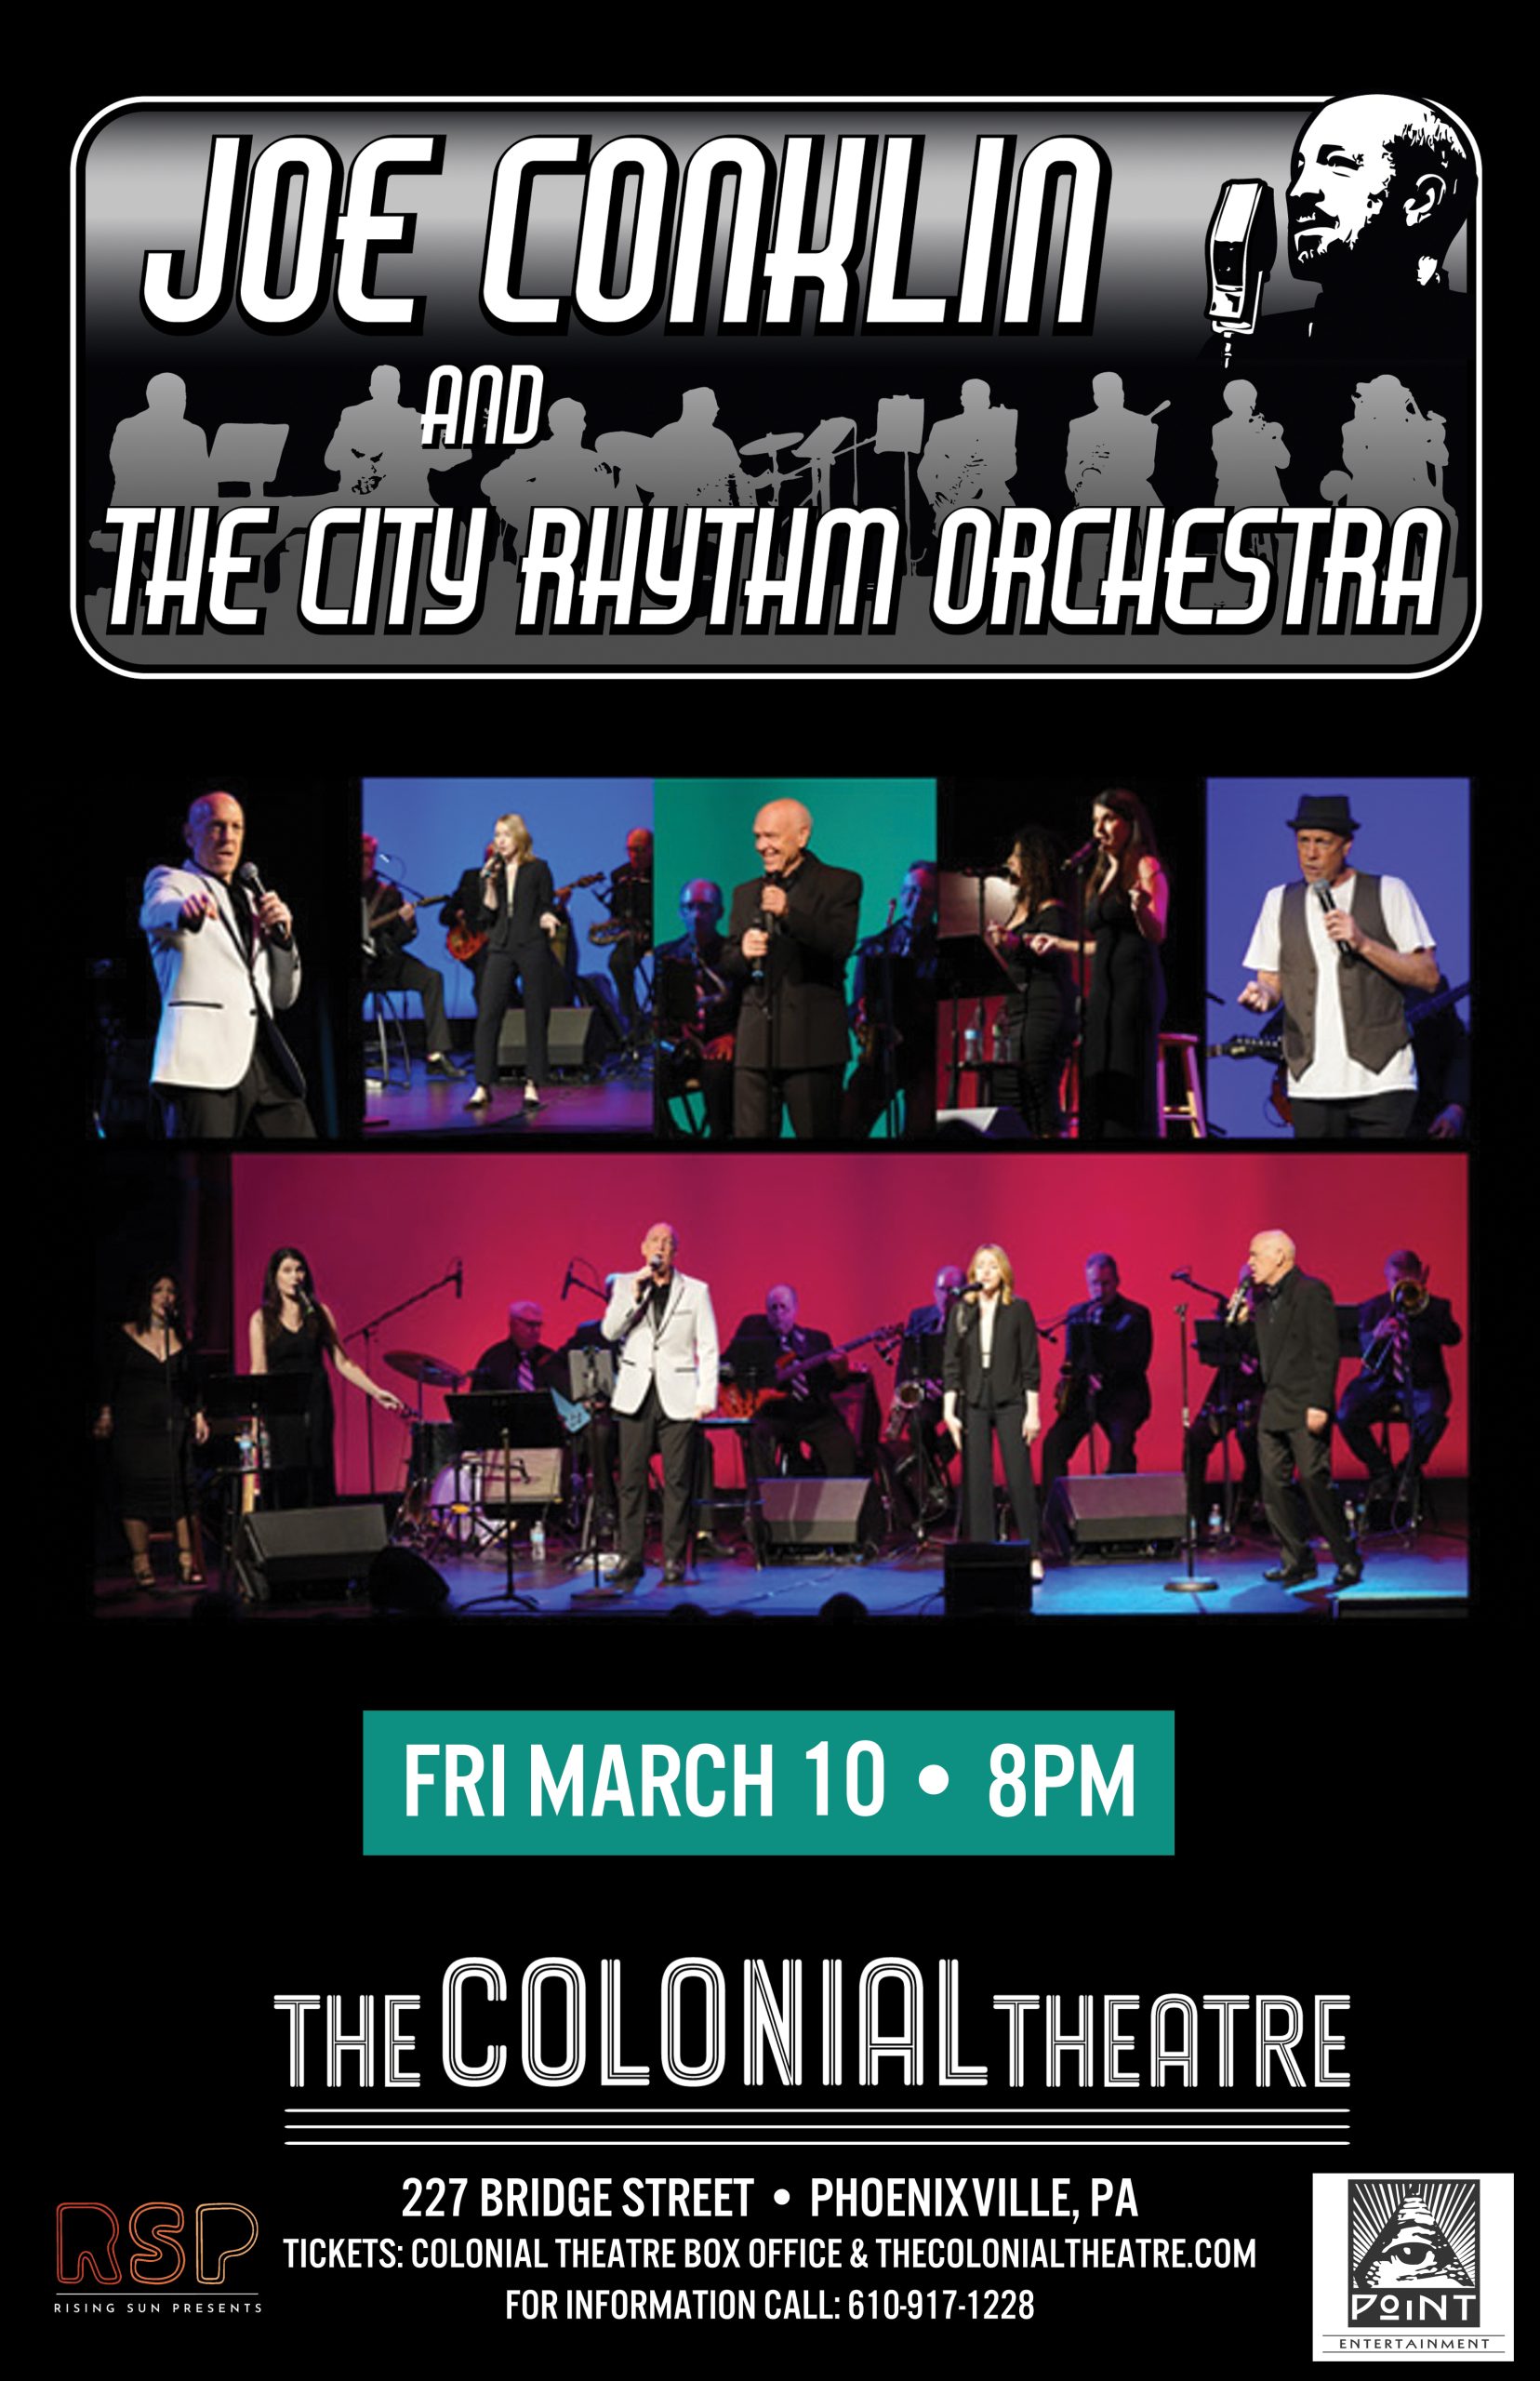 Joe Conklin and The City Rhythm Orchestra » The Colonial Theatre